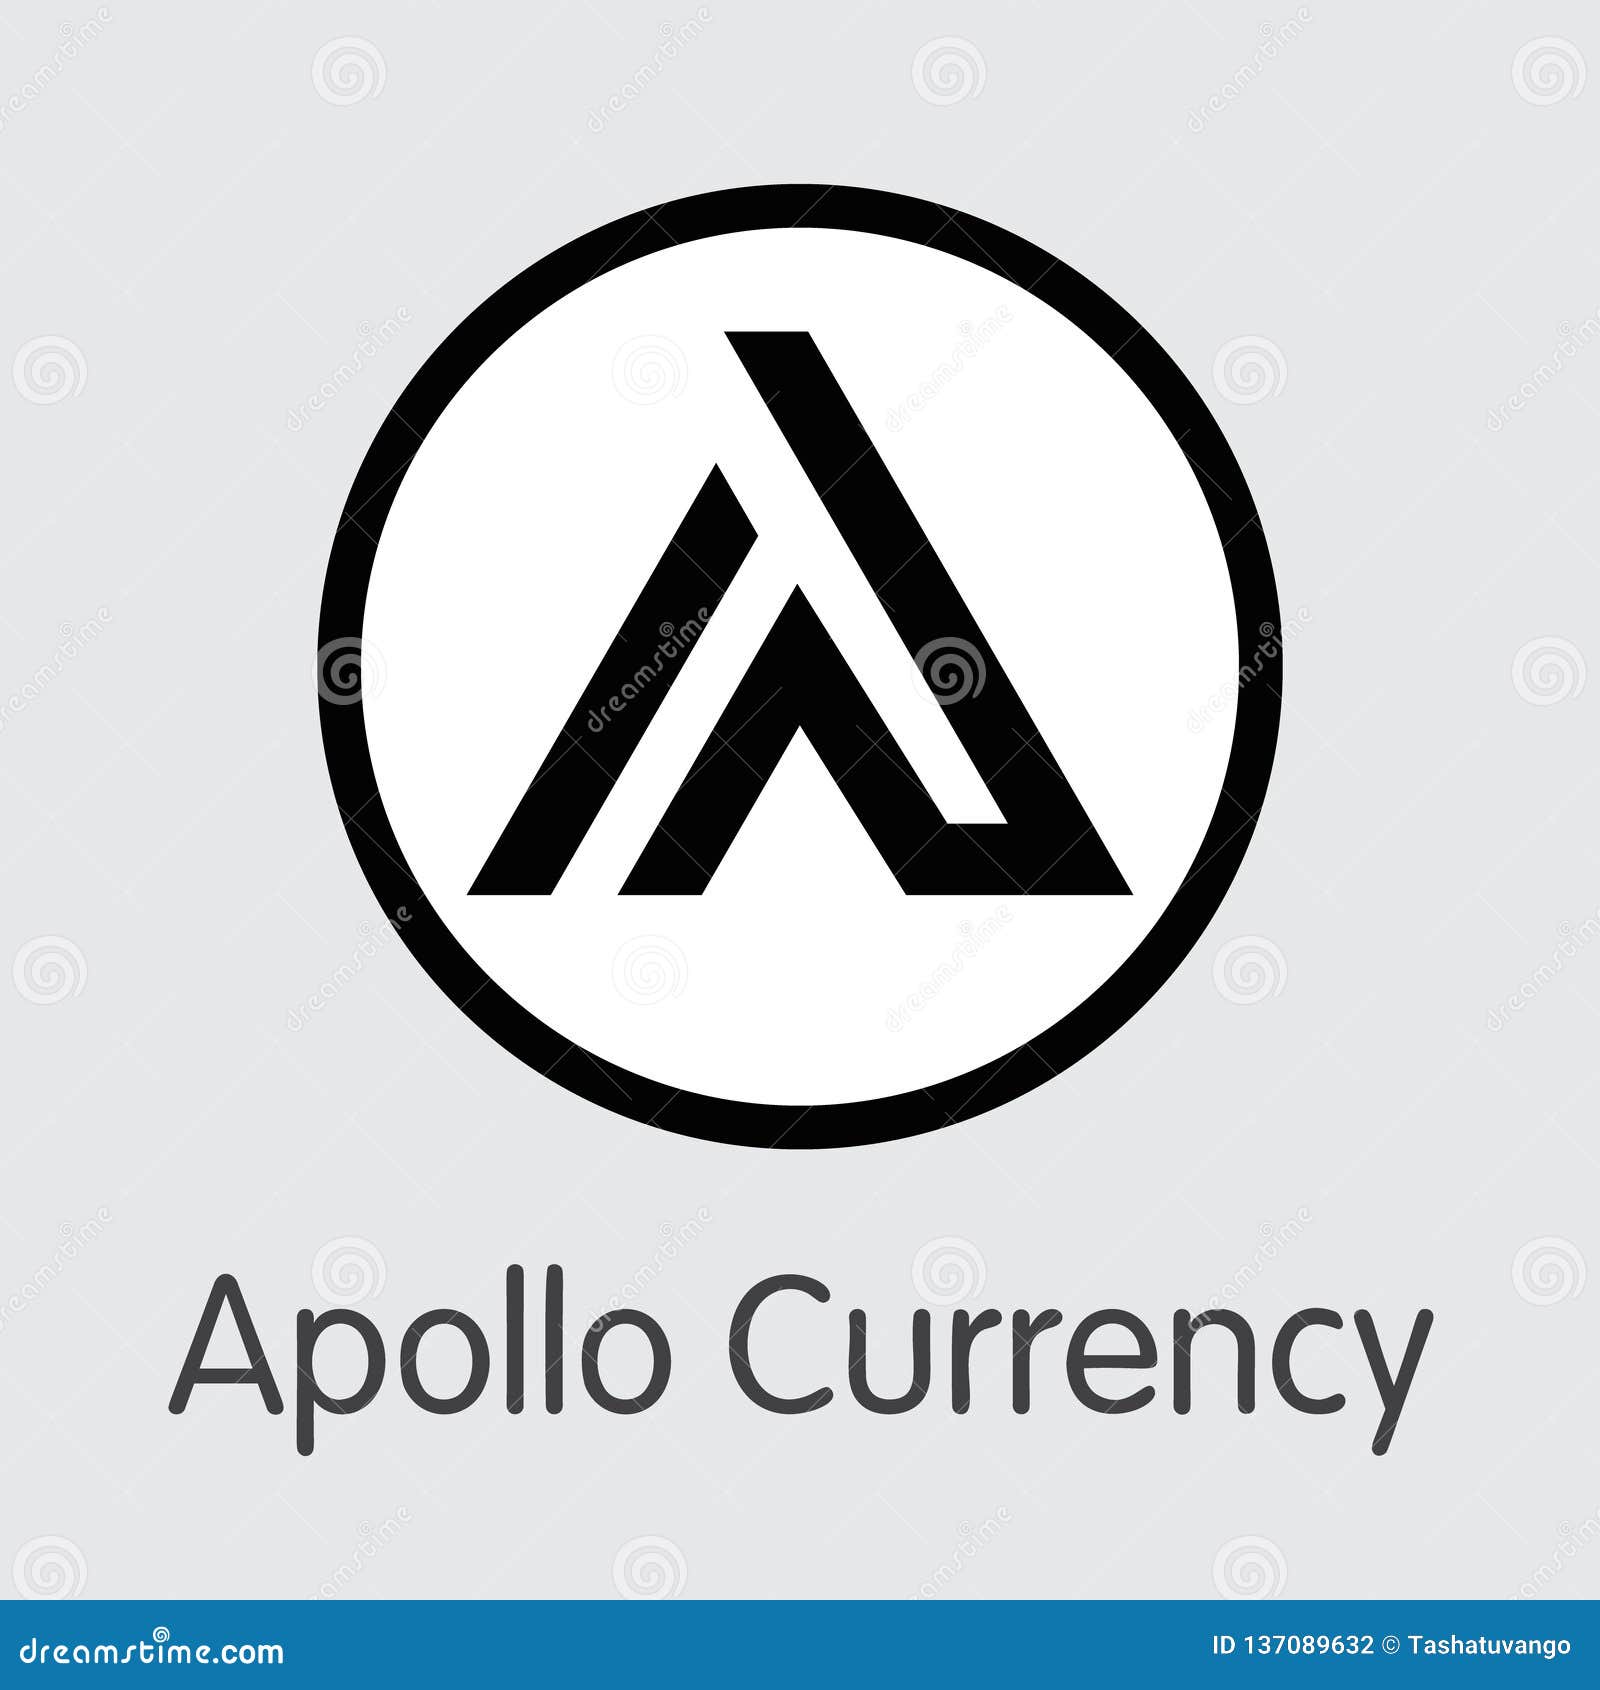 Explore the Exciting Partnership of Ripple XRP and Apollo Currency in Africa